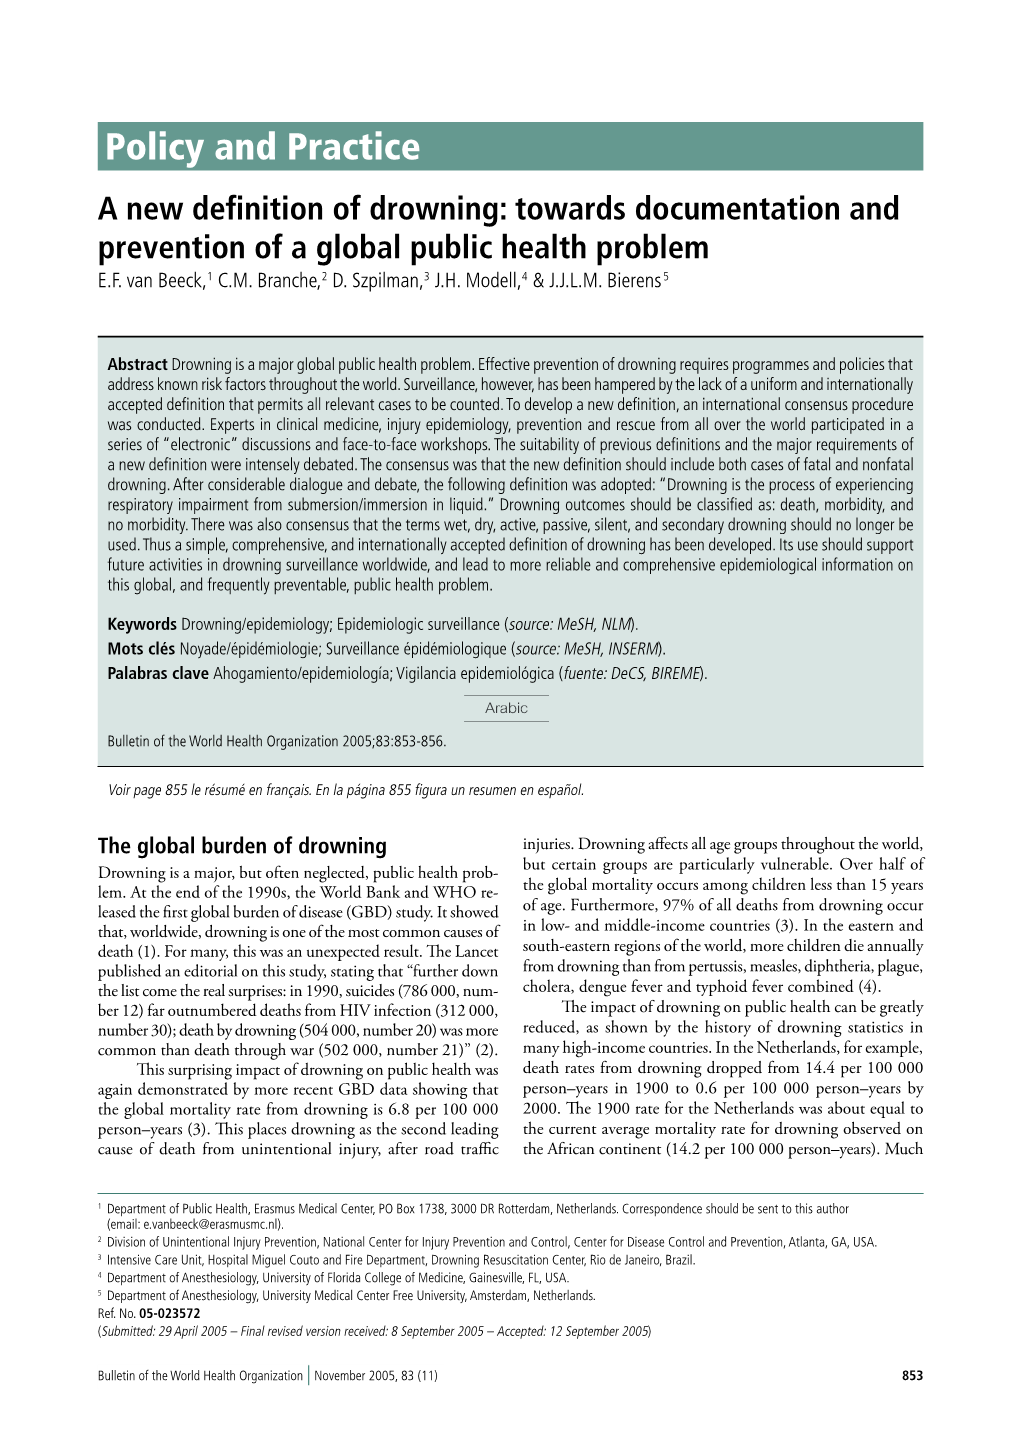 Policy and Practice a New Deﬁnition of Drowning: Towards Documentation and Prevention of a Global Public Health Problem E.F